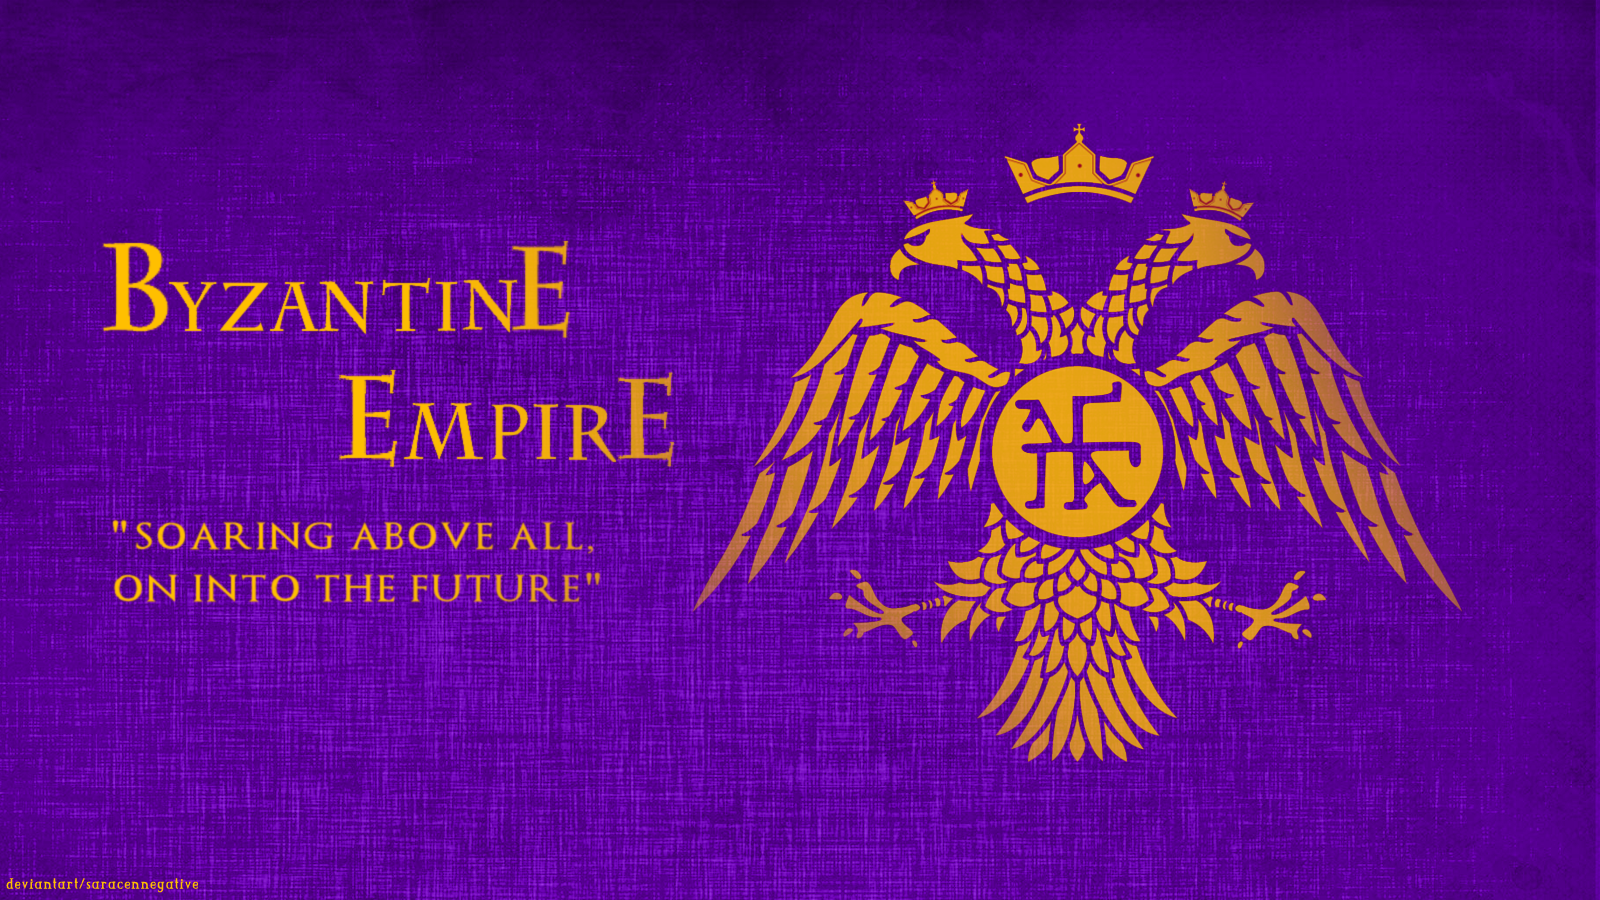 byzantine_coat_of_arms_by_saracennegative-d7fwhe0.png